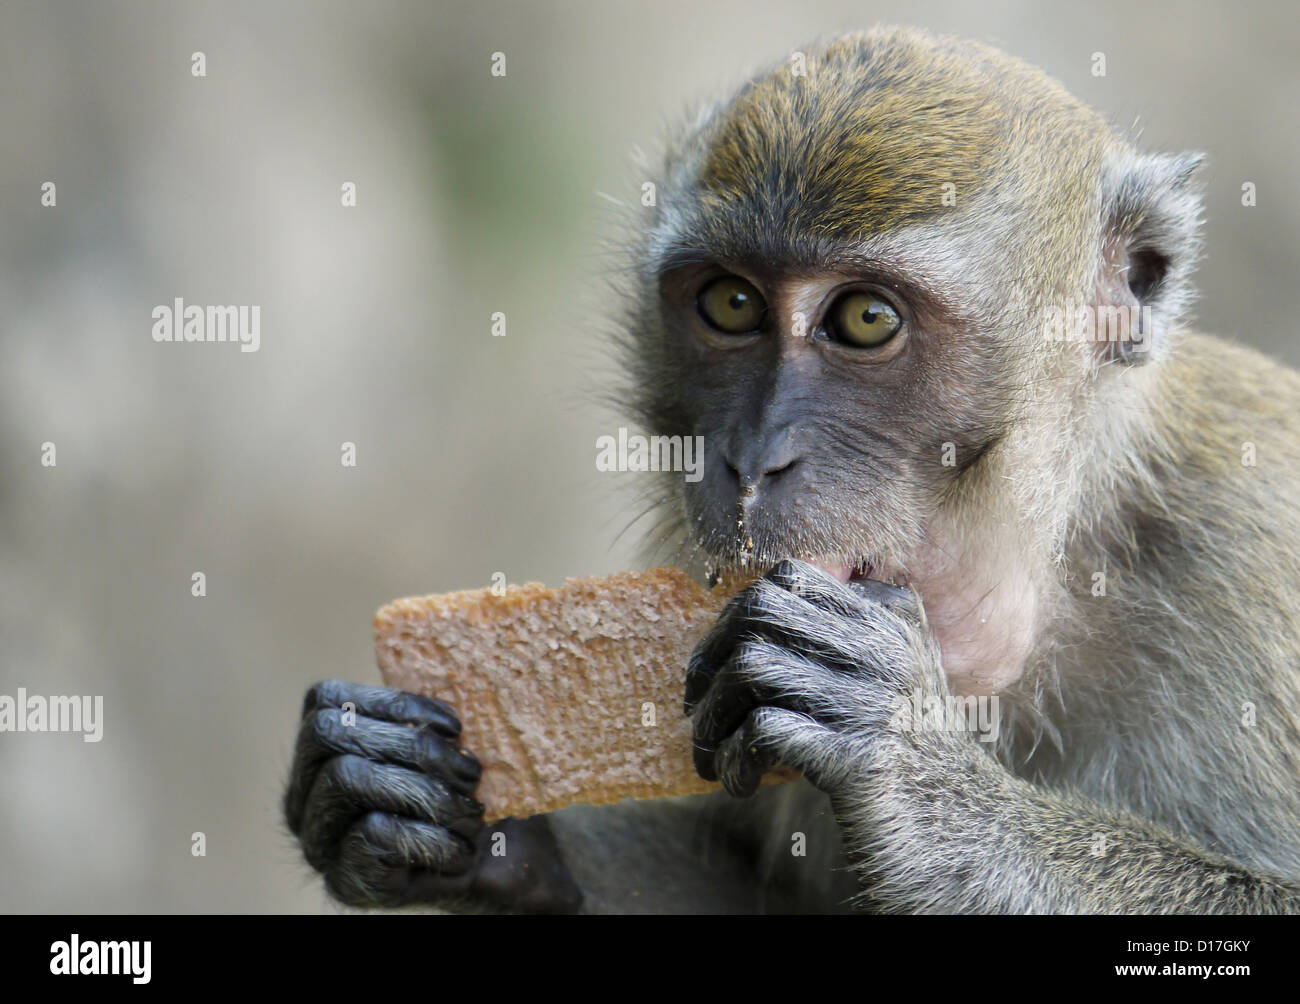 A Portrait of a Monkey and a Wafer Stock Photo